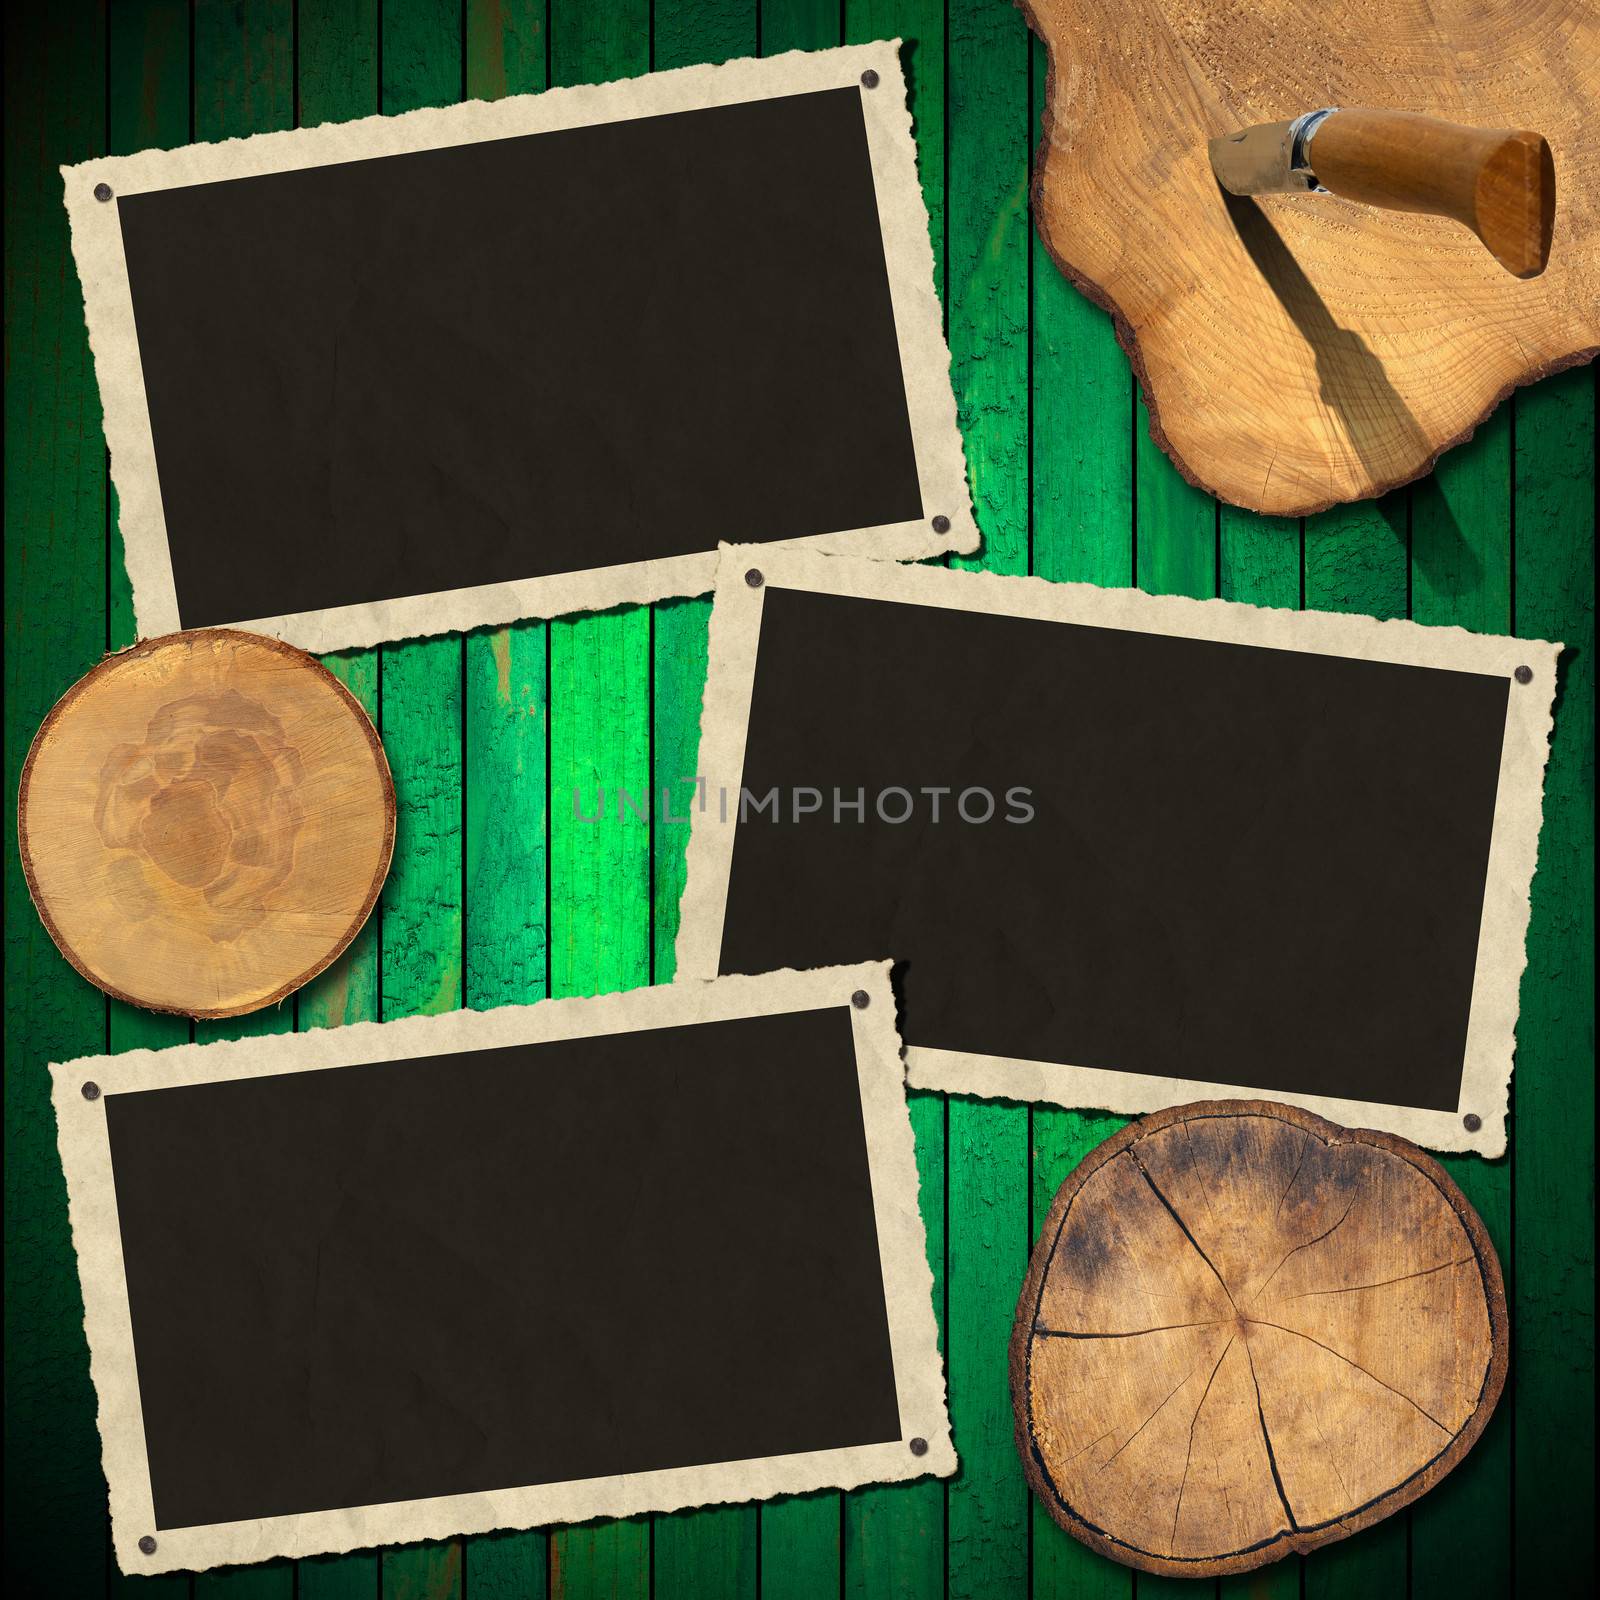 Three aged photo frames on wooden green background with sections of the trunk and folding knife
